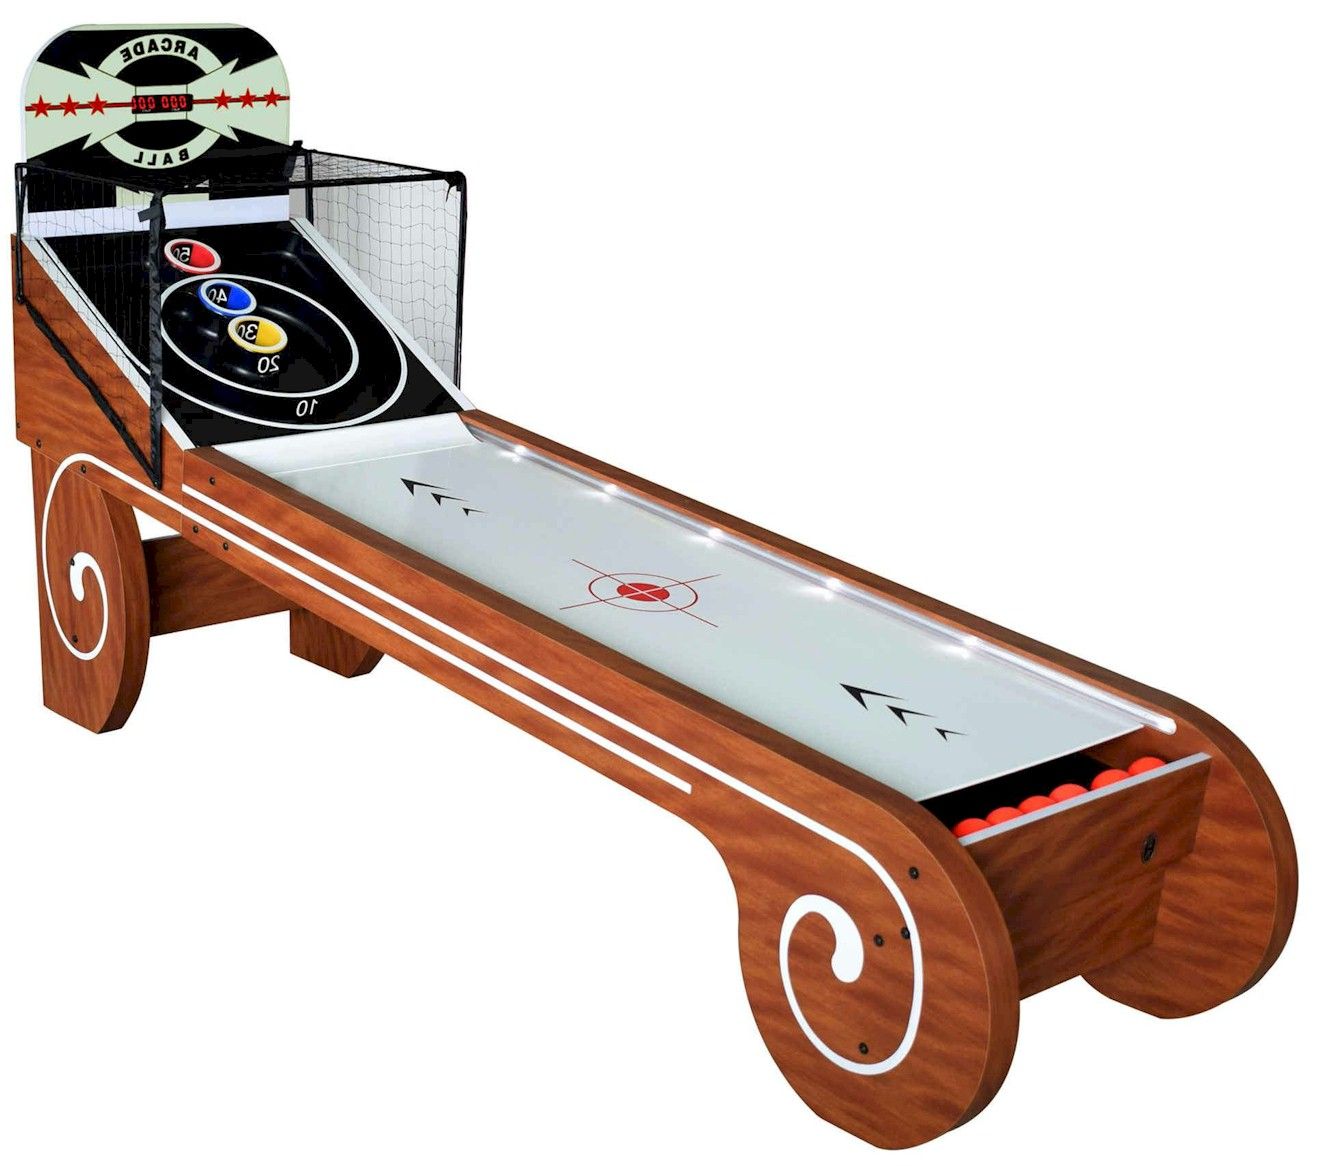 Wood carved skee ball with white shiny cork pad and red balls in the front corner of the machine